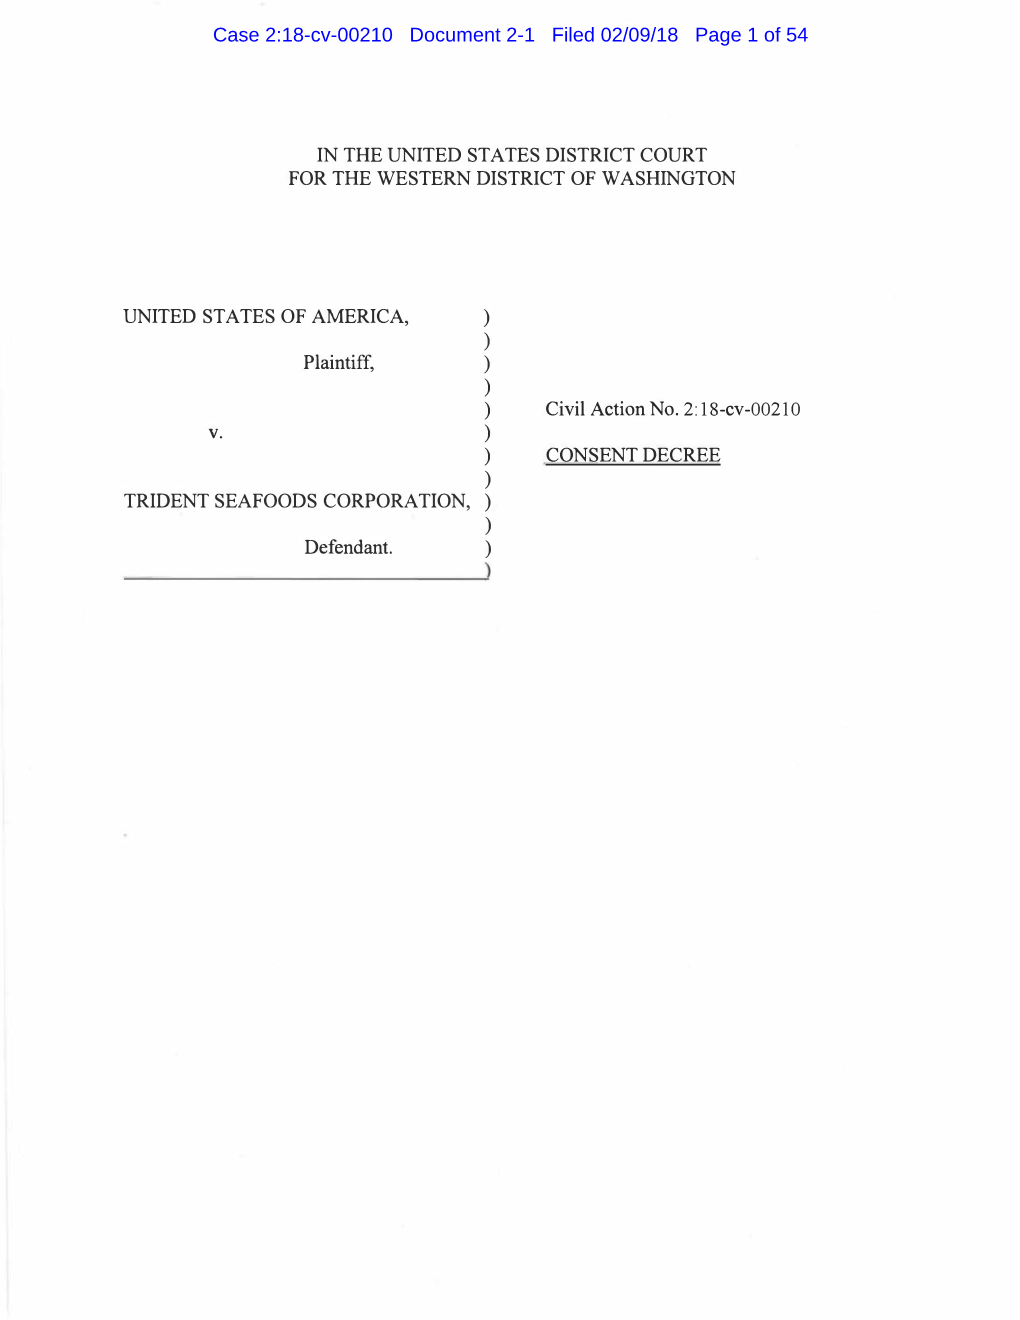 Case 2:18-Cv-00210 Document 2-1 Filed 02/09/18 Page 1 of 54